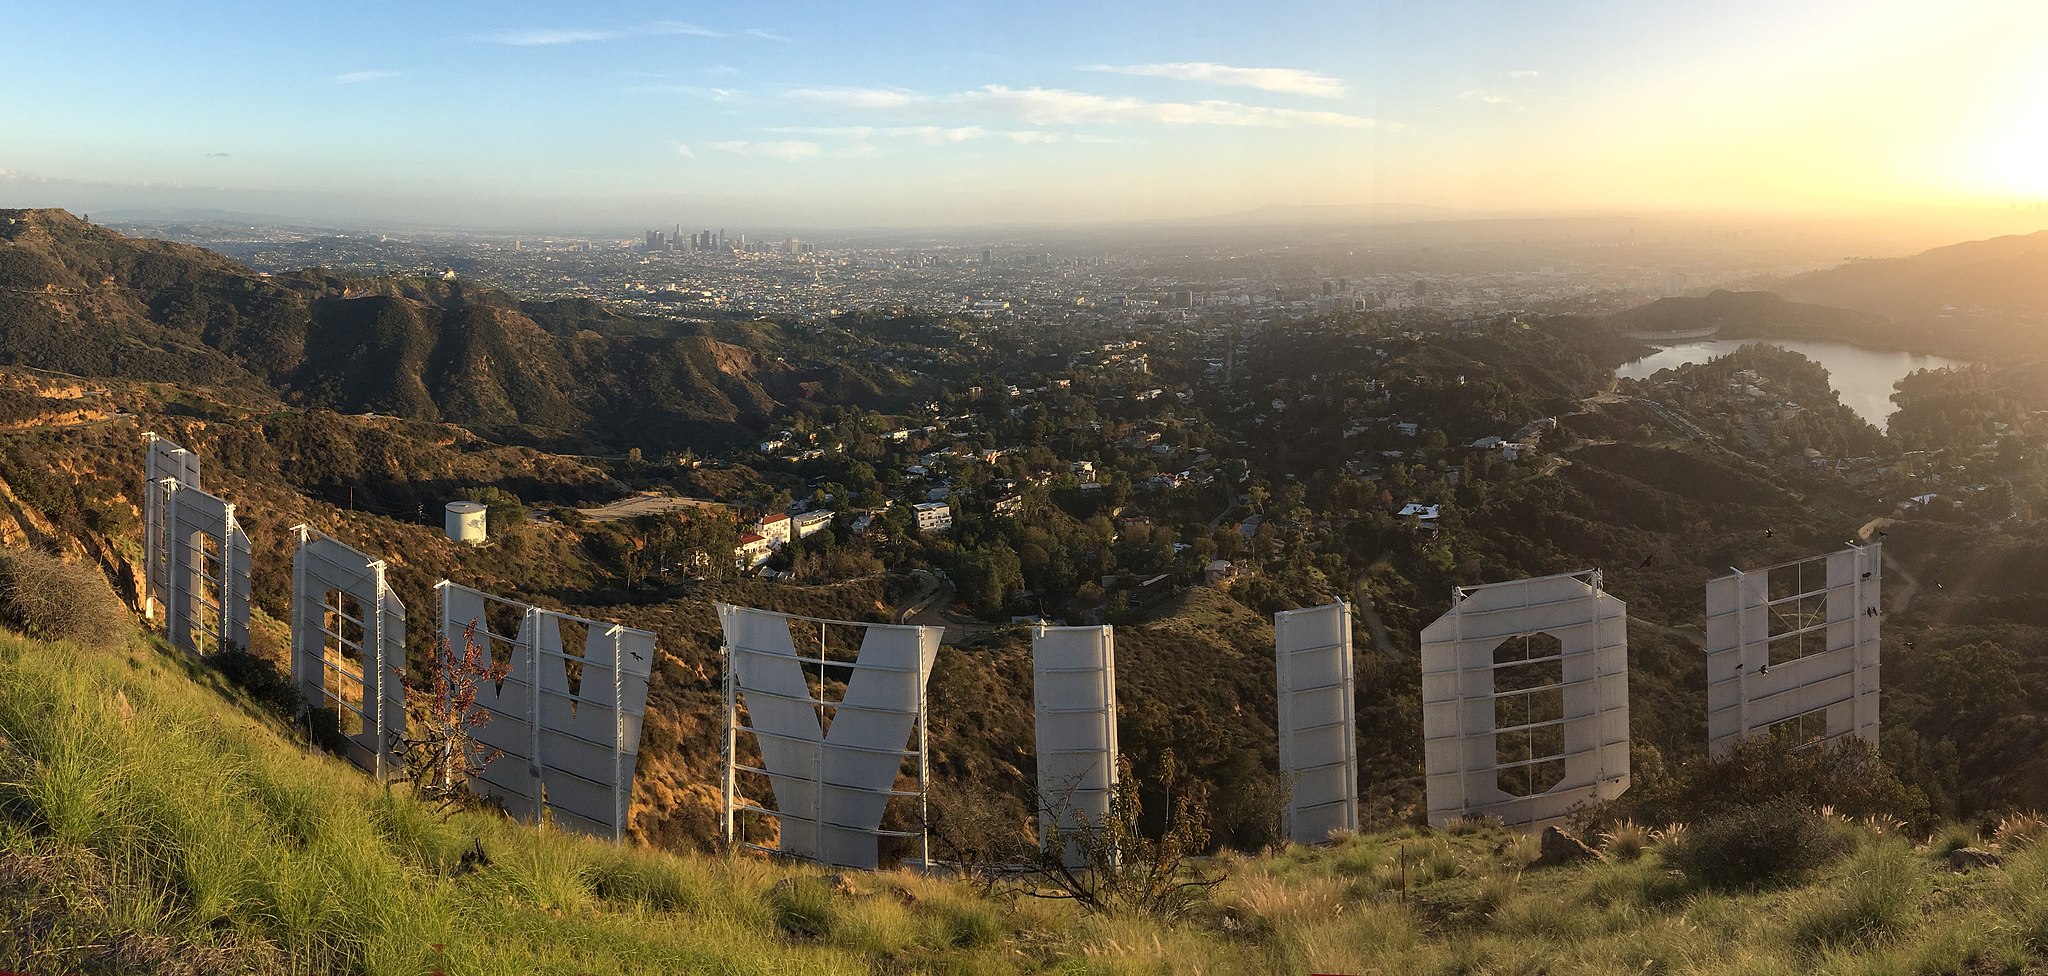 A picture of the Hollywood sign from behind and above the sign looking out over Los Angeles.